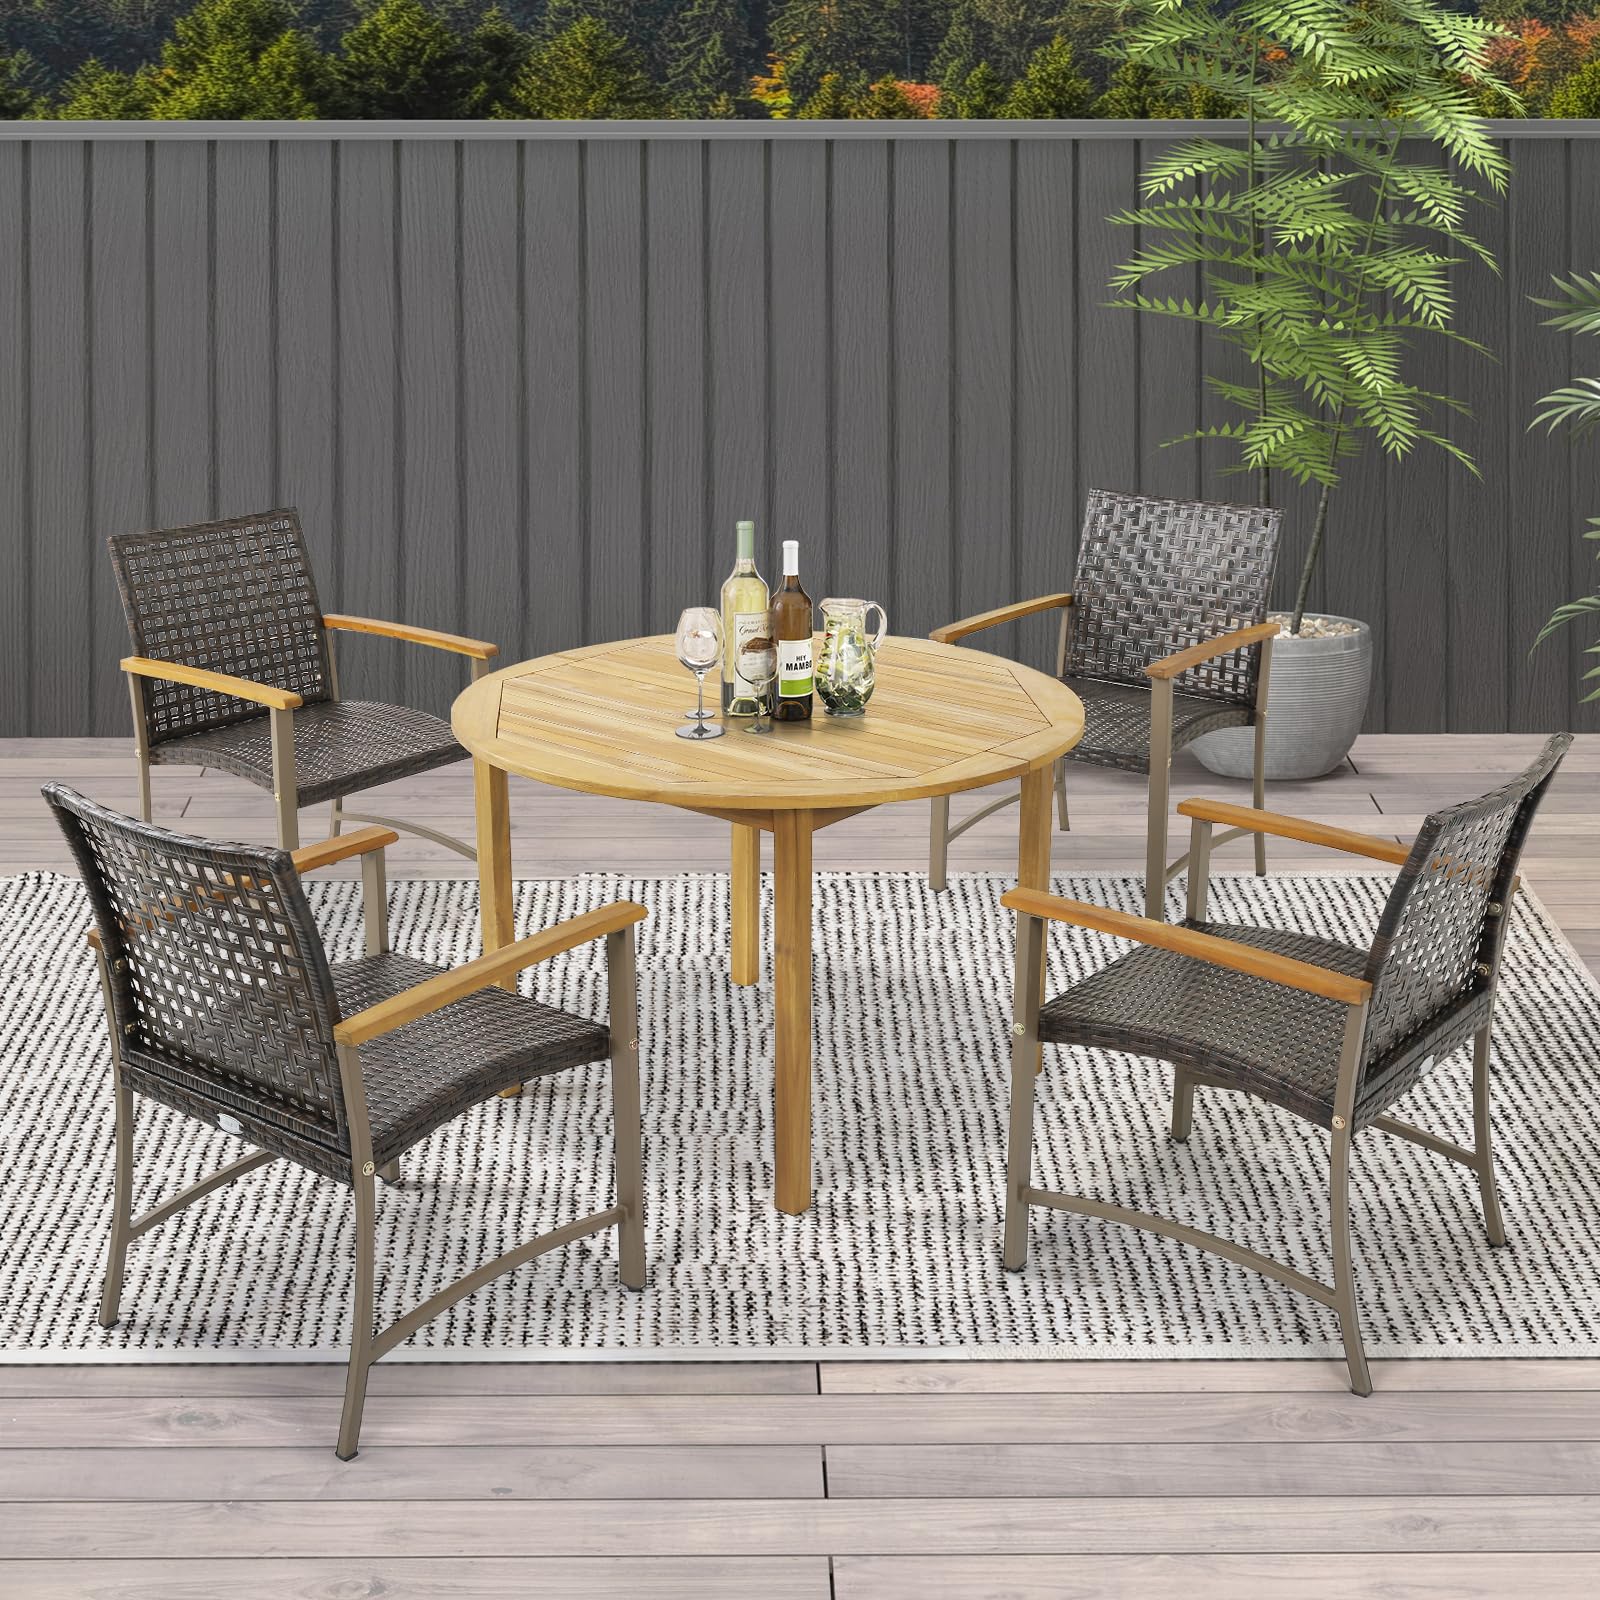 Outdoor PE Wicker & Heavy-Duty Metal Chairs with Acacia Wood Armrests - Tangkula